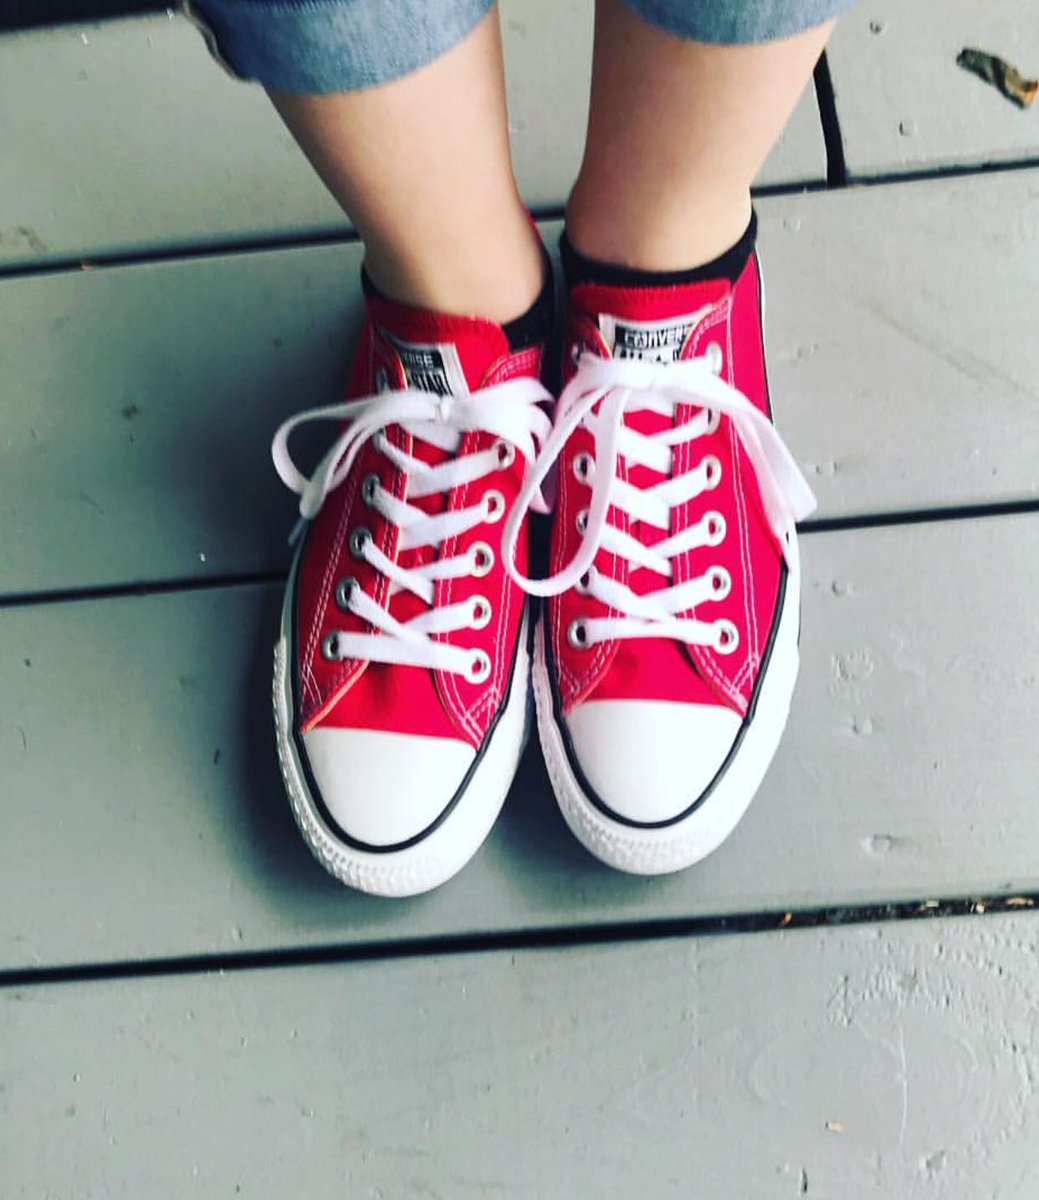 For 13yo Madison’s Language Arts class, she had to give a speech on a topic she felt passionate about. She chose to speak about Oakley. Madison, also a twin, was 11 when Oakley had his fatal reaction to nuts. This is Madison’s worst fear #foodallergy #redsneakersforoakley